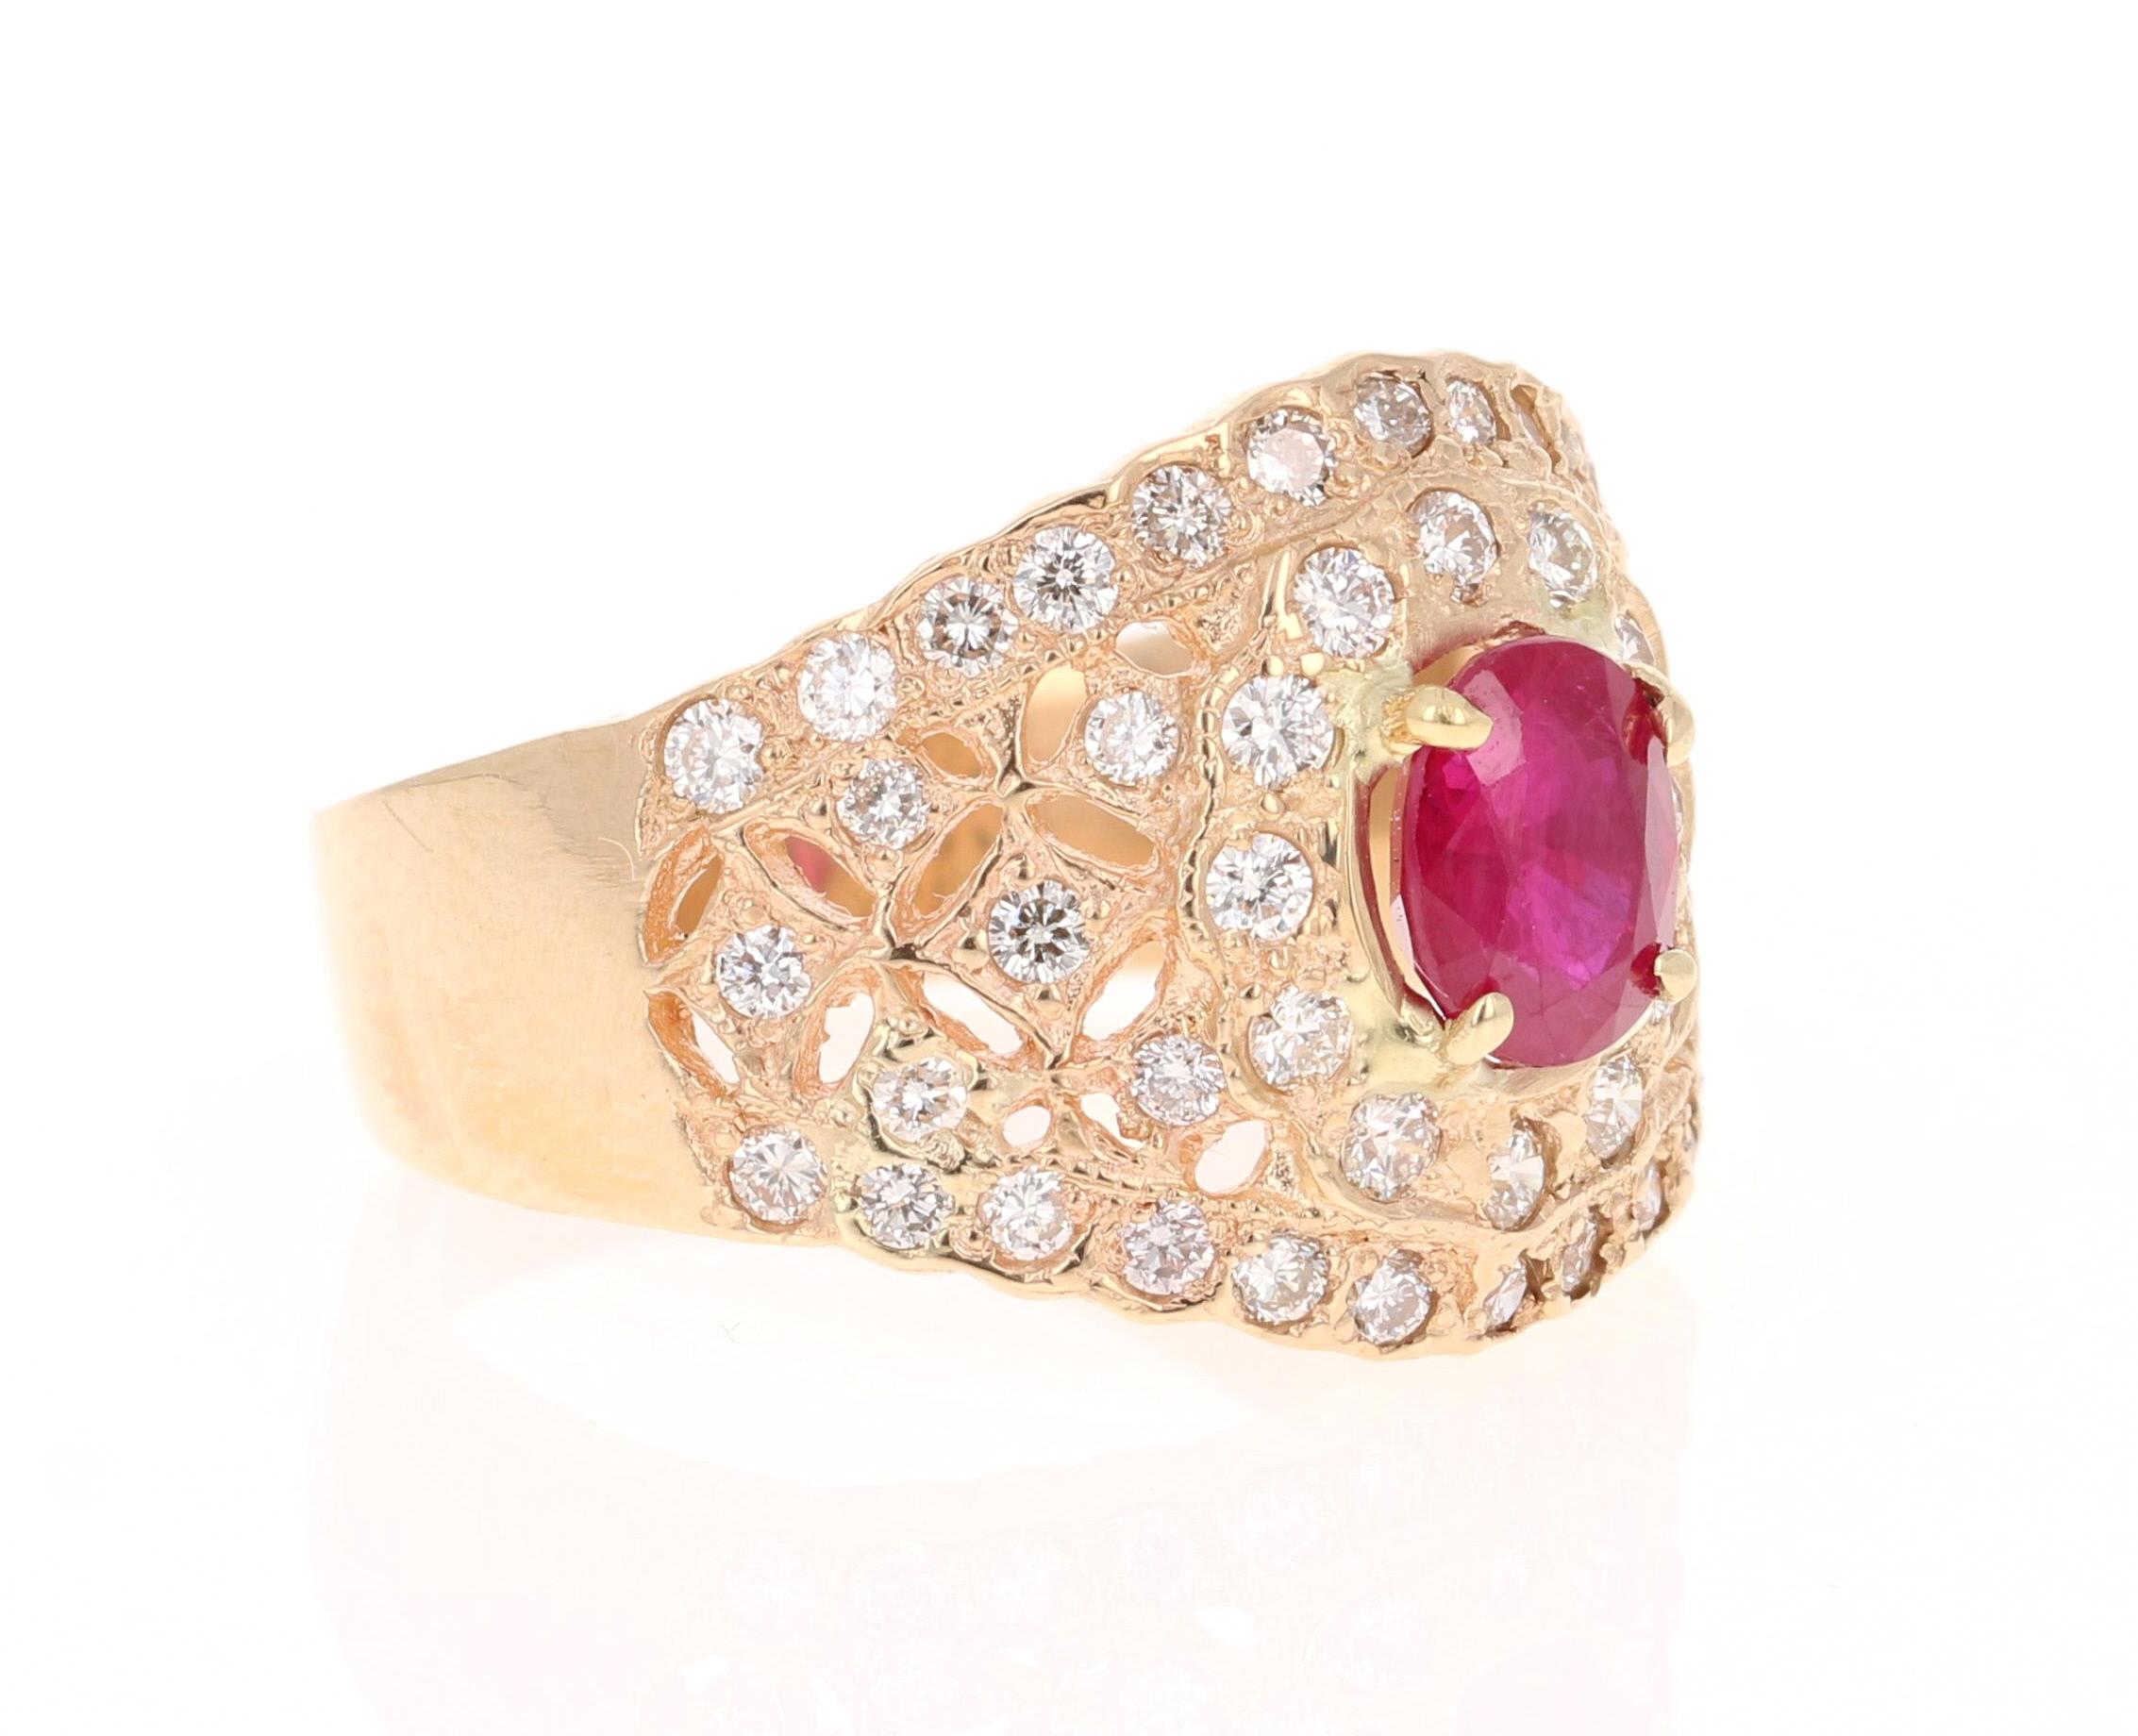 This Ruby Ring is a unique vintage design inspired beauty! The Oval Cut Ruby is 1.07 carats and is surrounded by 50 Round Cut Diamonds that weigh 0.81 carats (Clarity: VS2, Color: H).  

The ruby measures at 7 mm x 6 mm and the entire face of the